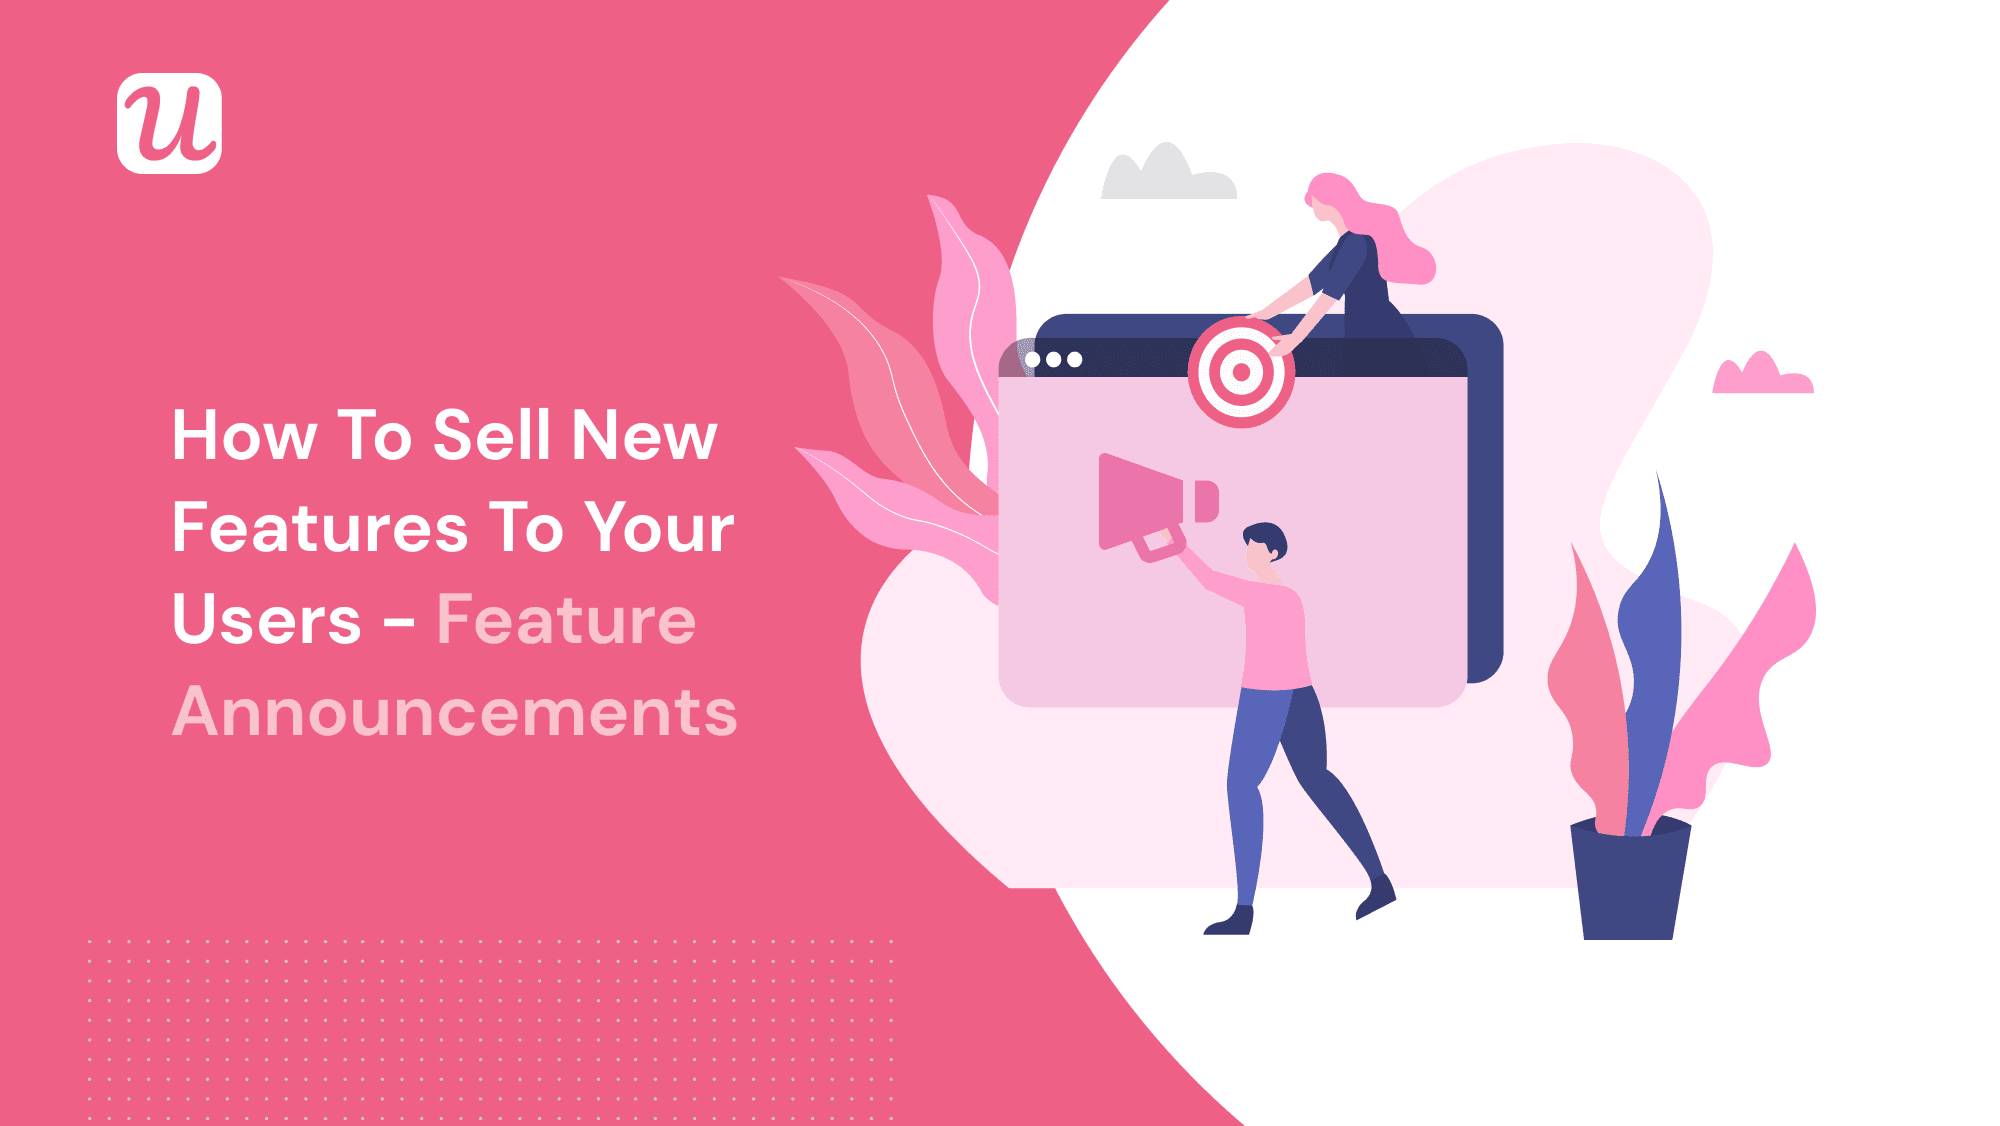 How to Sell New Features to Your Users - Feature Announcements That Skyrocket Adoption